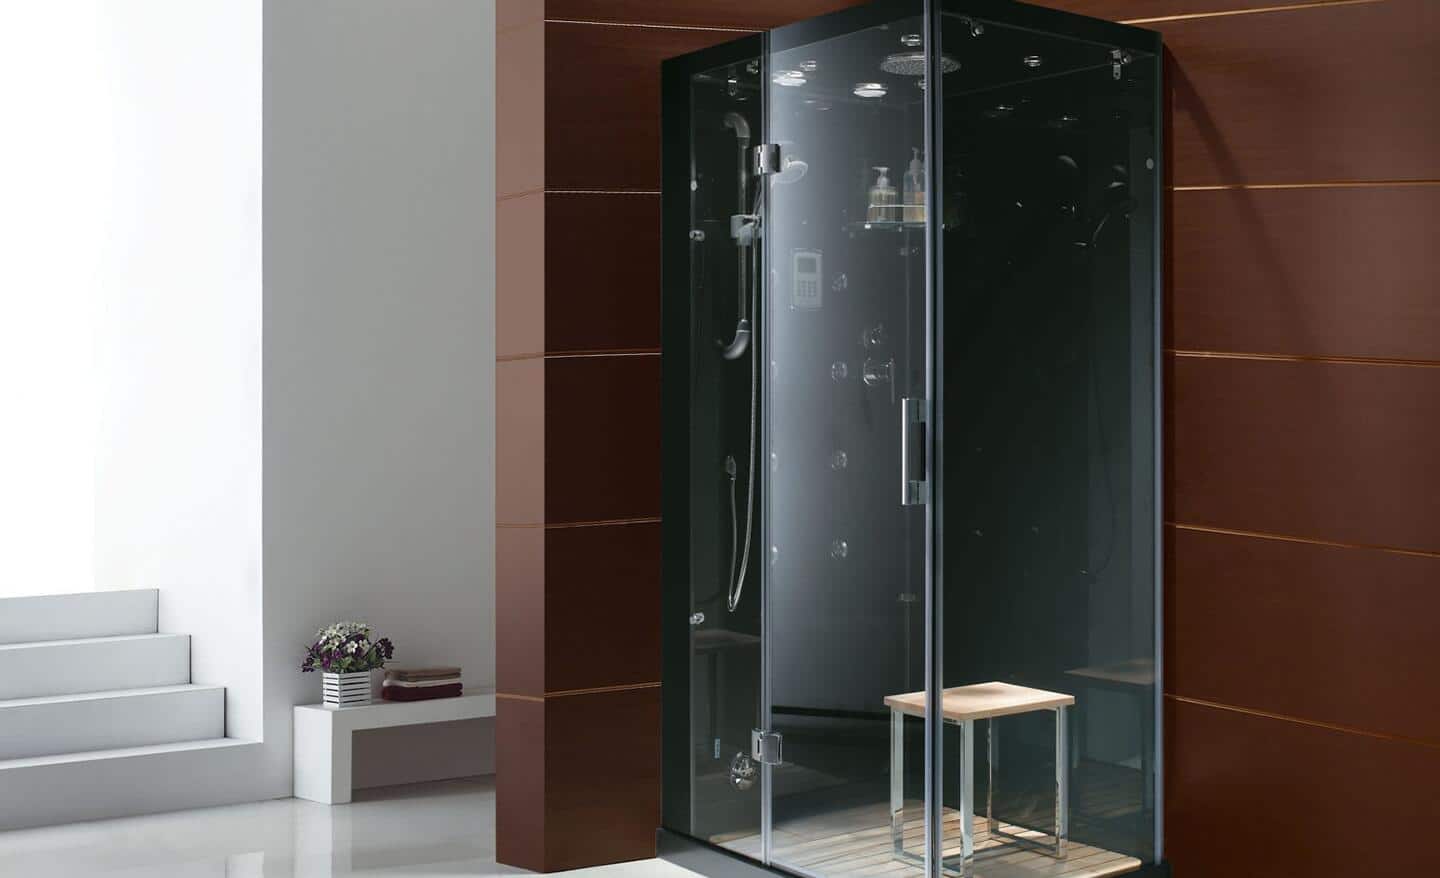 A steam shower door installed in a bath with paneled walls.